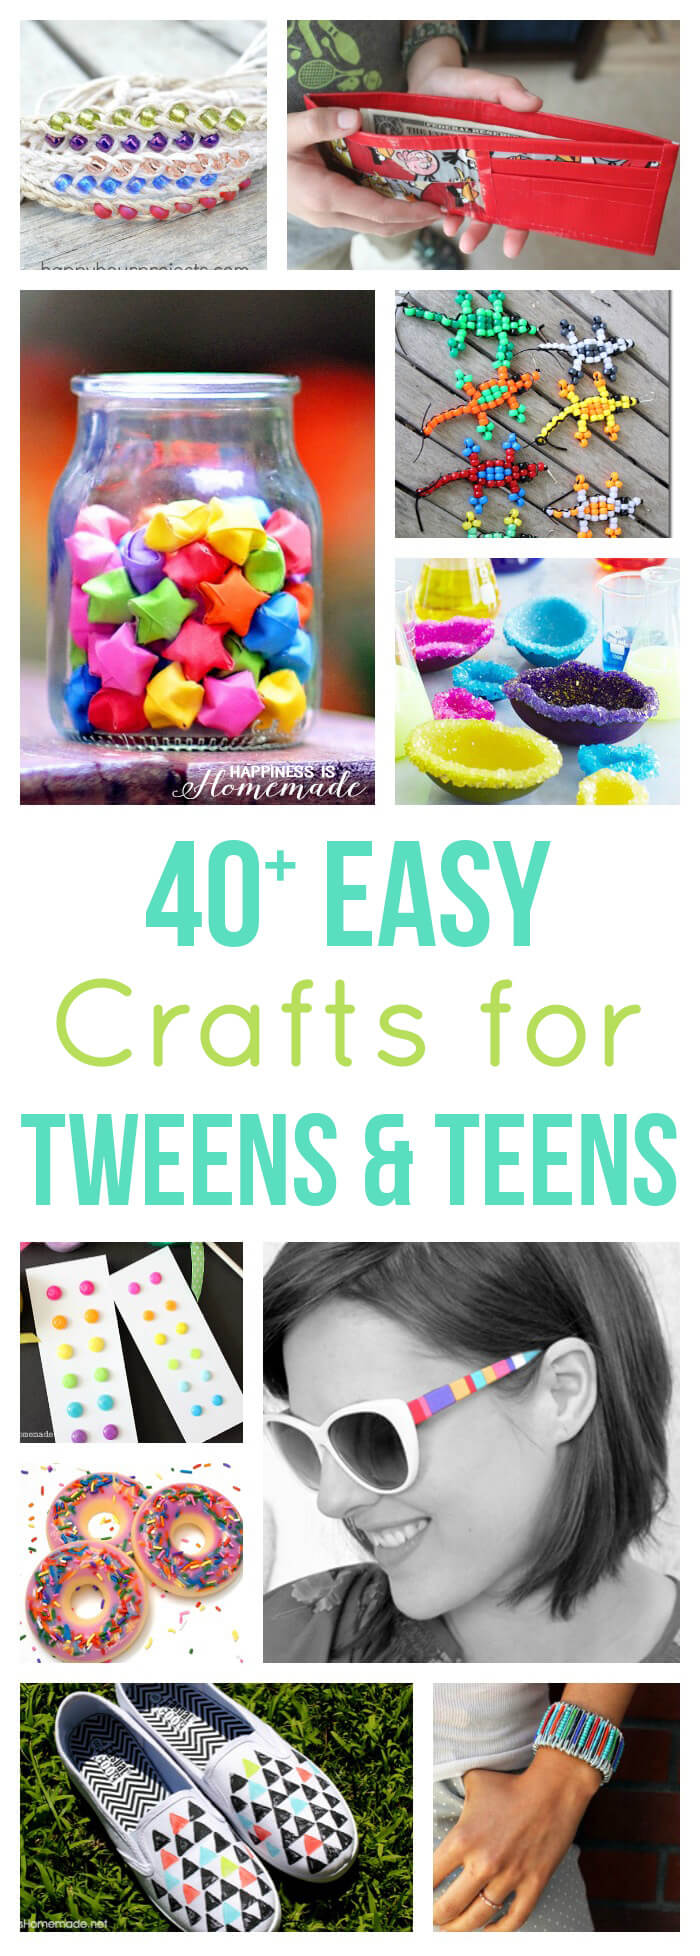 40 Easy Crafts for Teens and Tweens